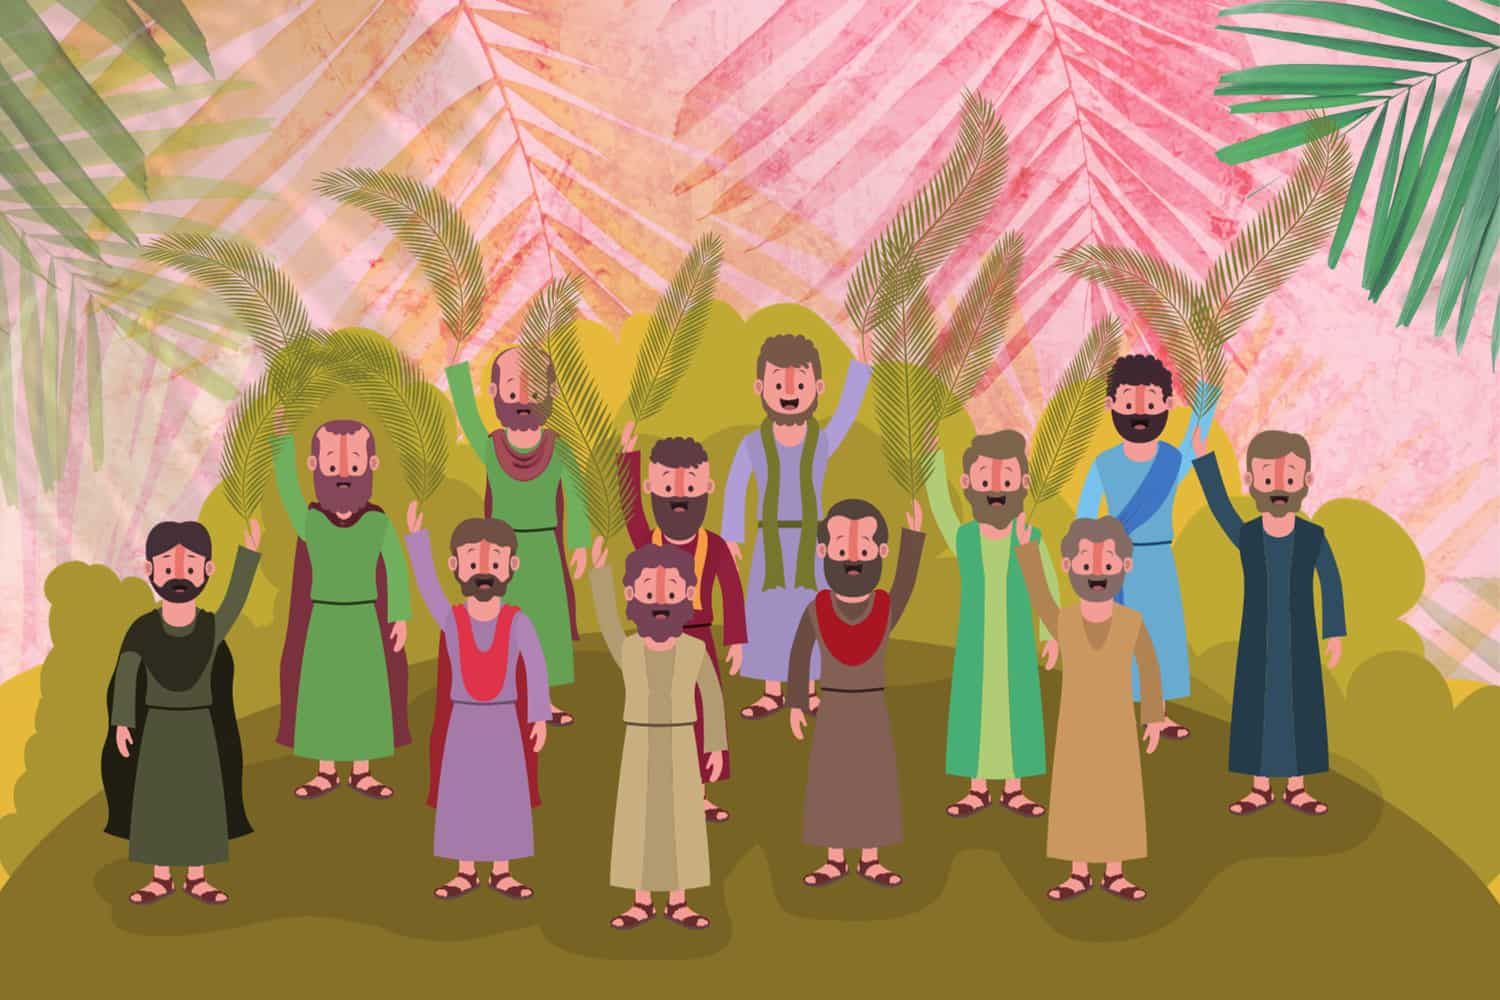 Lesson%20-%20NT%20Easter%2001%20-%20Palm%20Sunday%201%20Hosanna%20to%20the%20king-7298cb7c Messiah / Christ